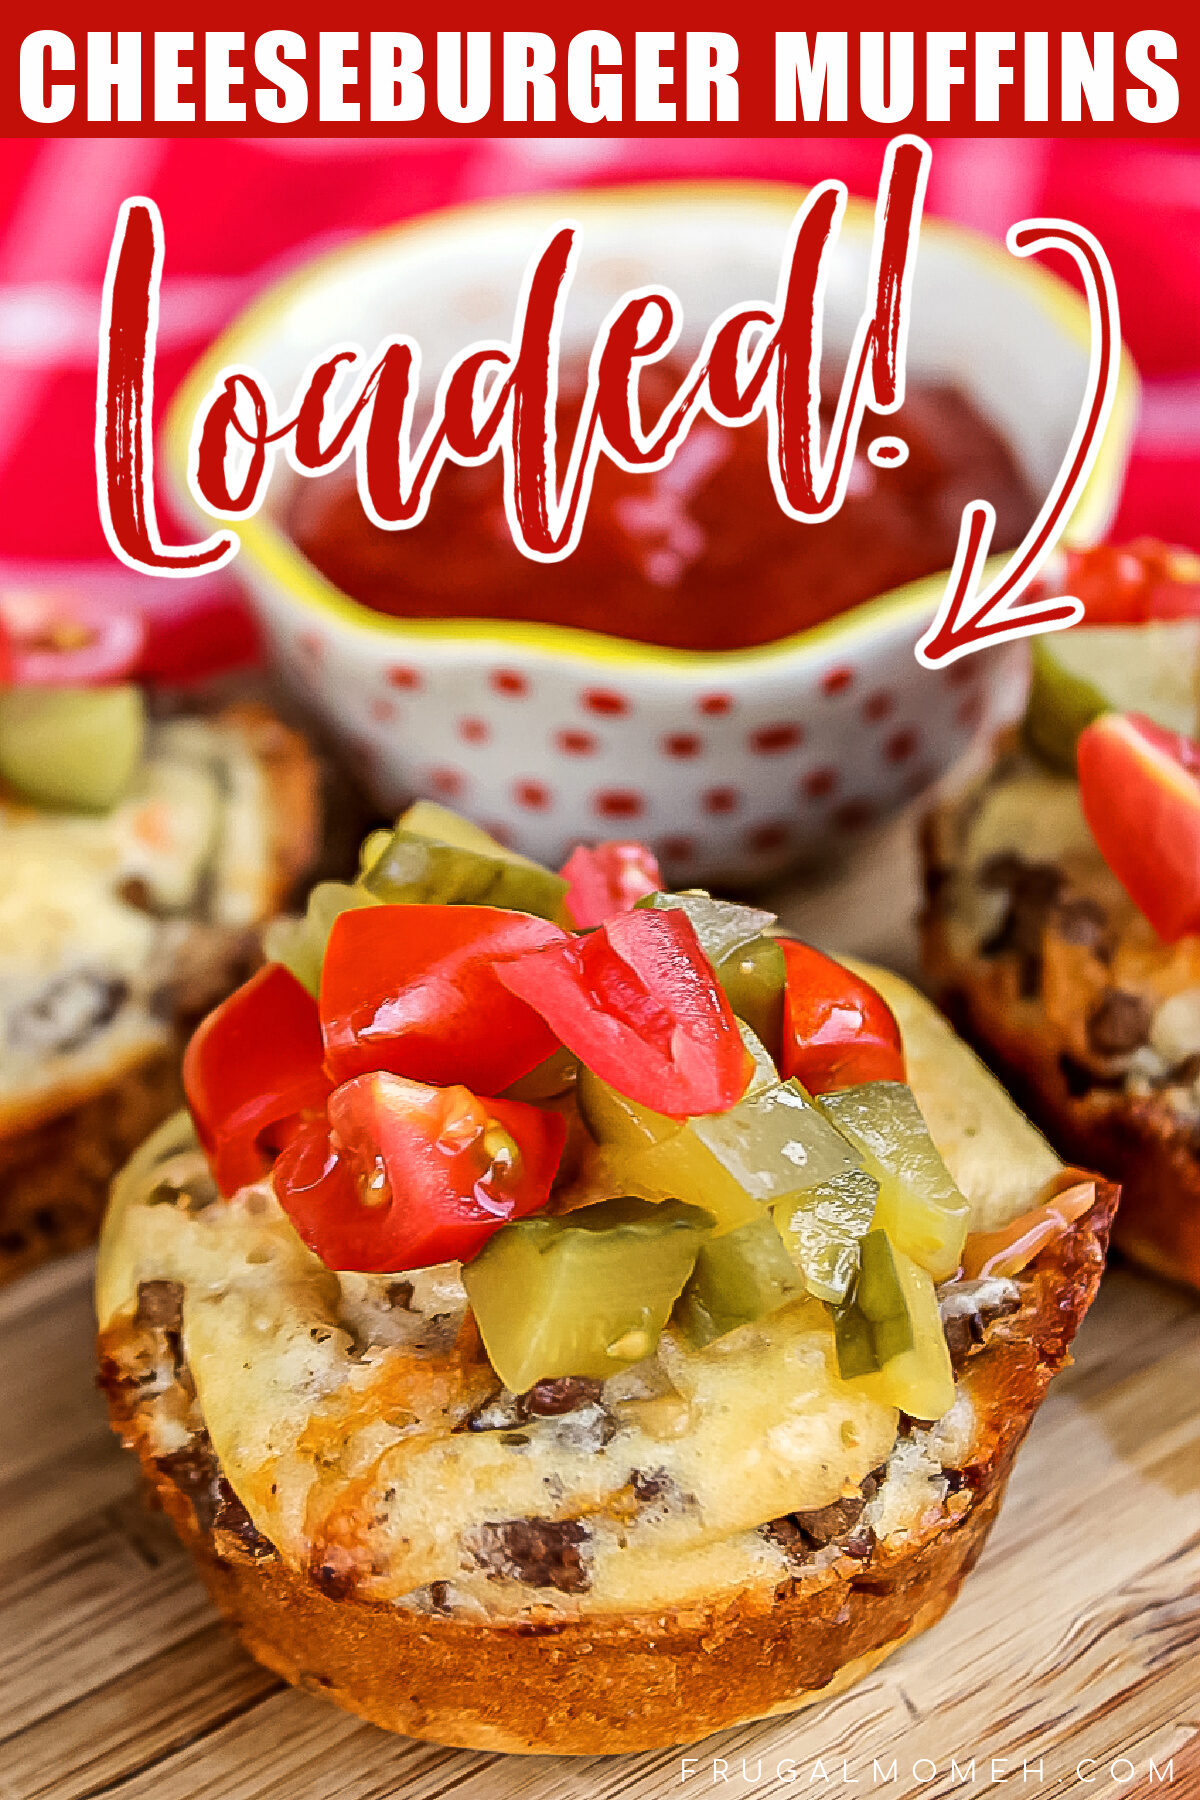 These Loaded Cheeseburger Muffins are ready in just 30 minutes for a tasty snack, lunch or even as a fun weeknight family meal.